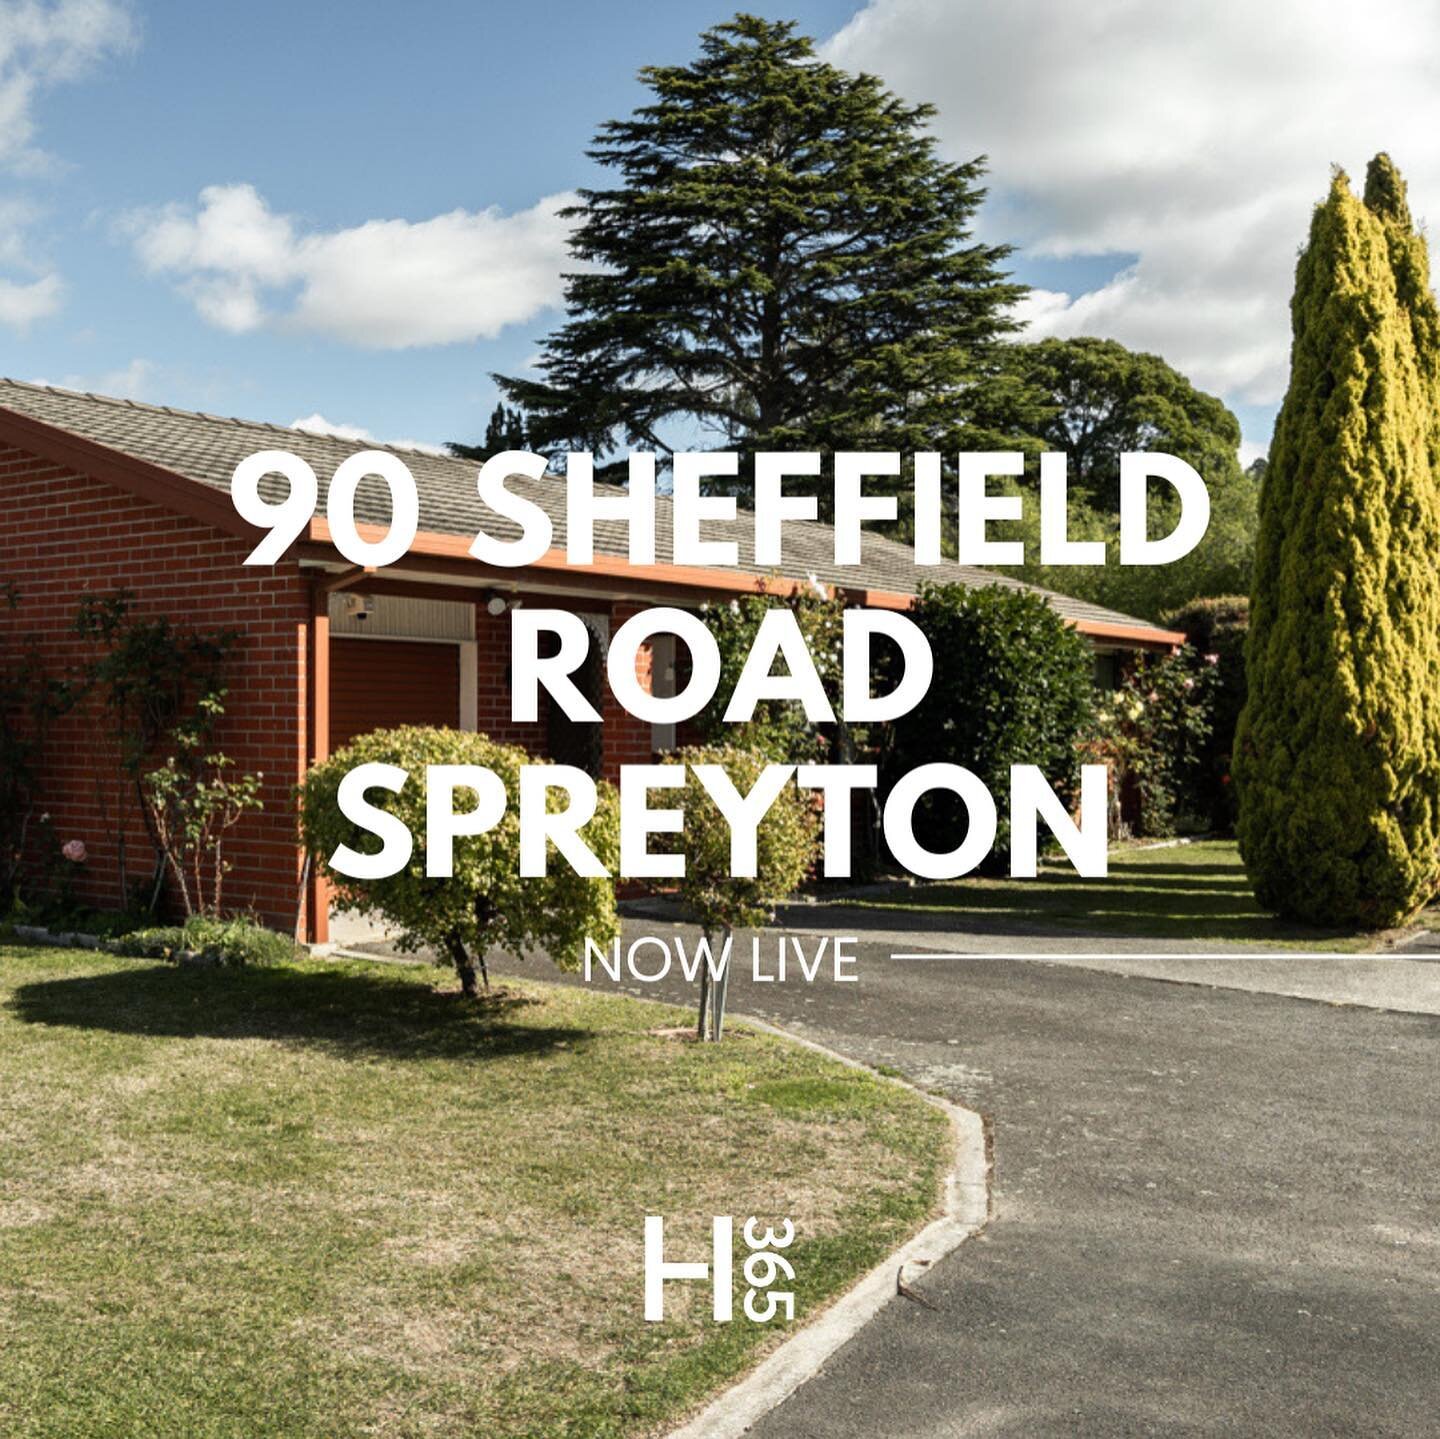 90 Sheffield Road, Spreyton. 

The ultimate investment, first home or downsize option. Link in bio. 

Check it out this Sunday 18/4 @ 3:30pm-4pm. #hudson365